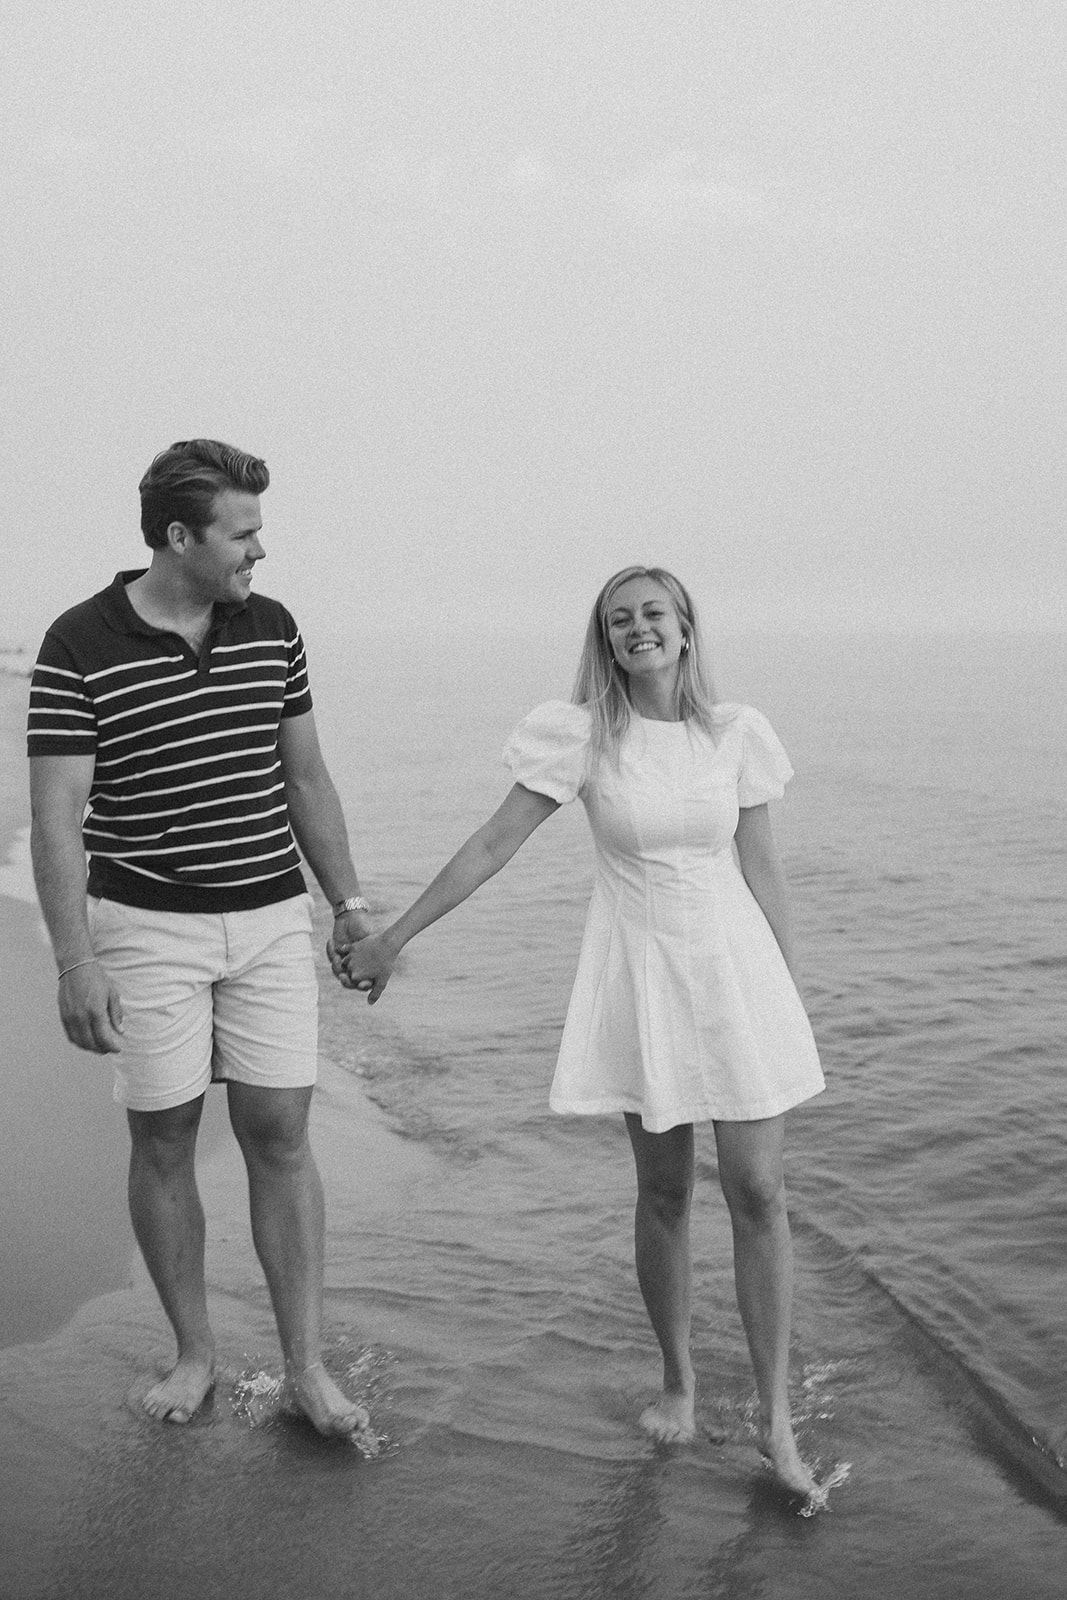 Black & white documentary style engagement photos by the beach